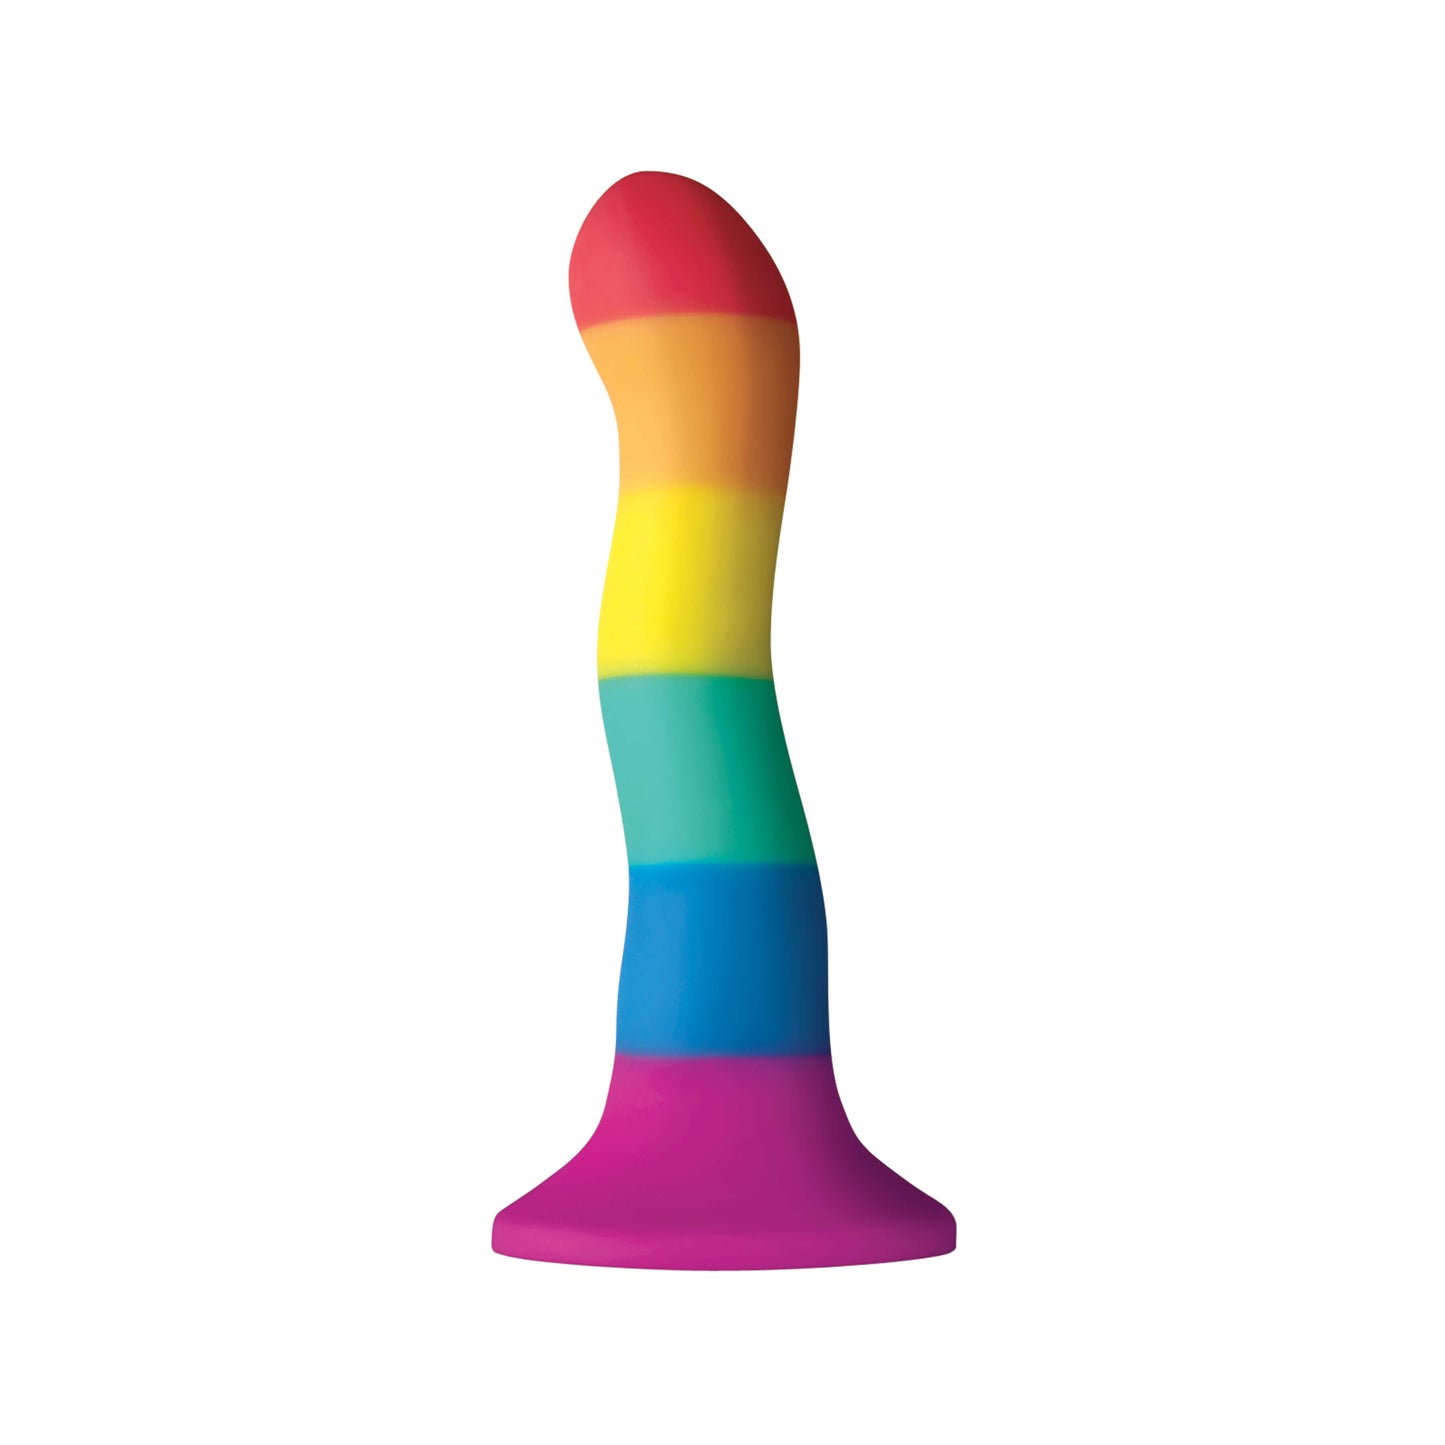 6 Inch Rainbow Silicone Dildo - Colours Pride Edition - The Bigger O online sex toy shop USA, Canada & UK shipping available